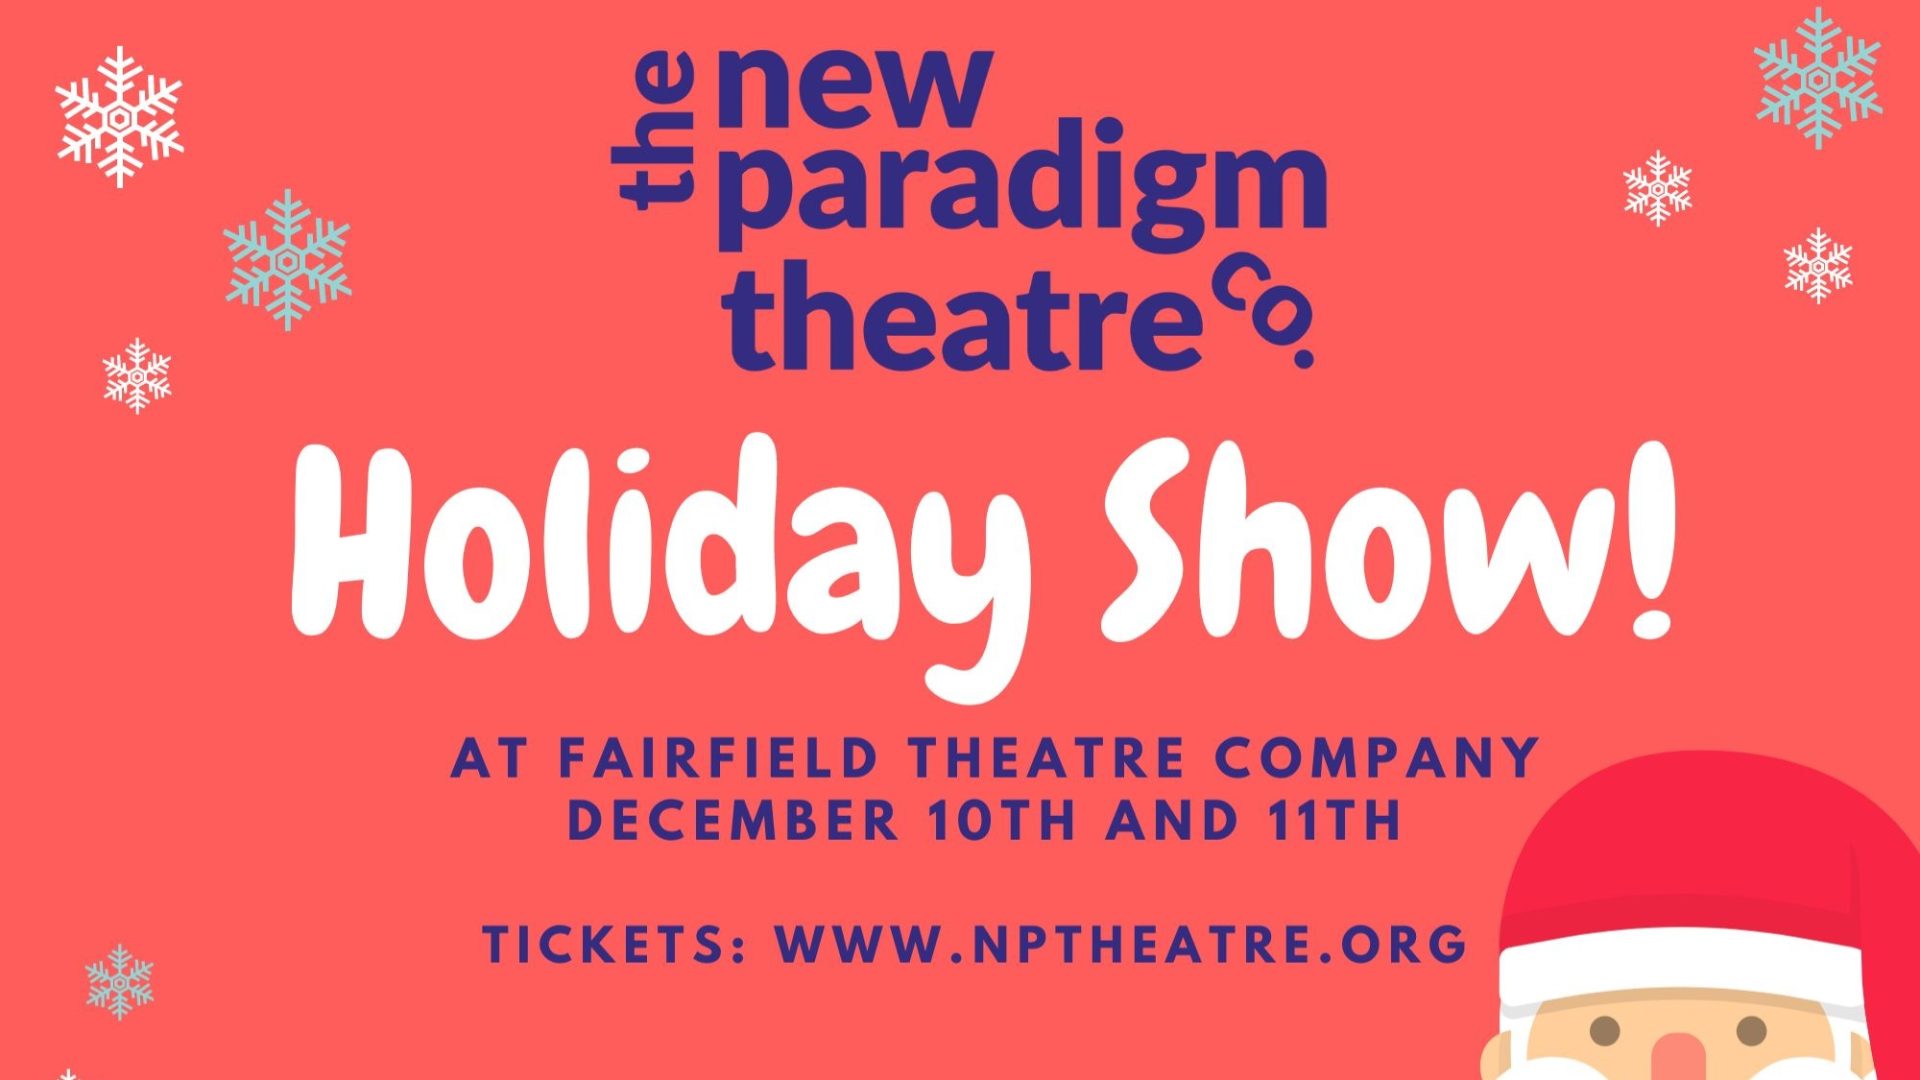 NPT annual Holiday Show